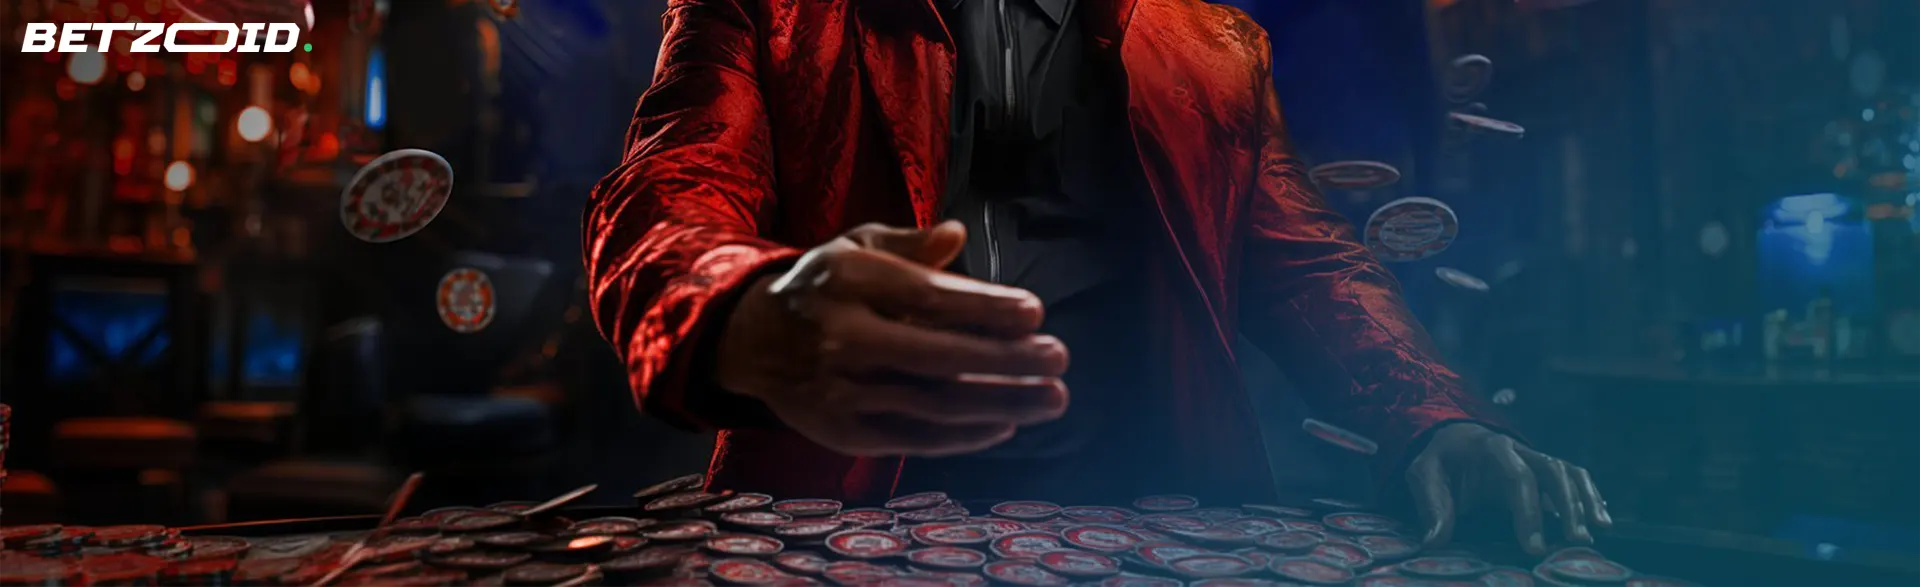 Dealer's hand of chips in casinos of instant play.